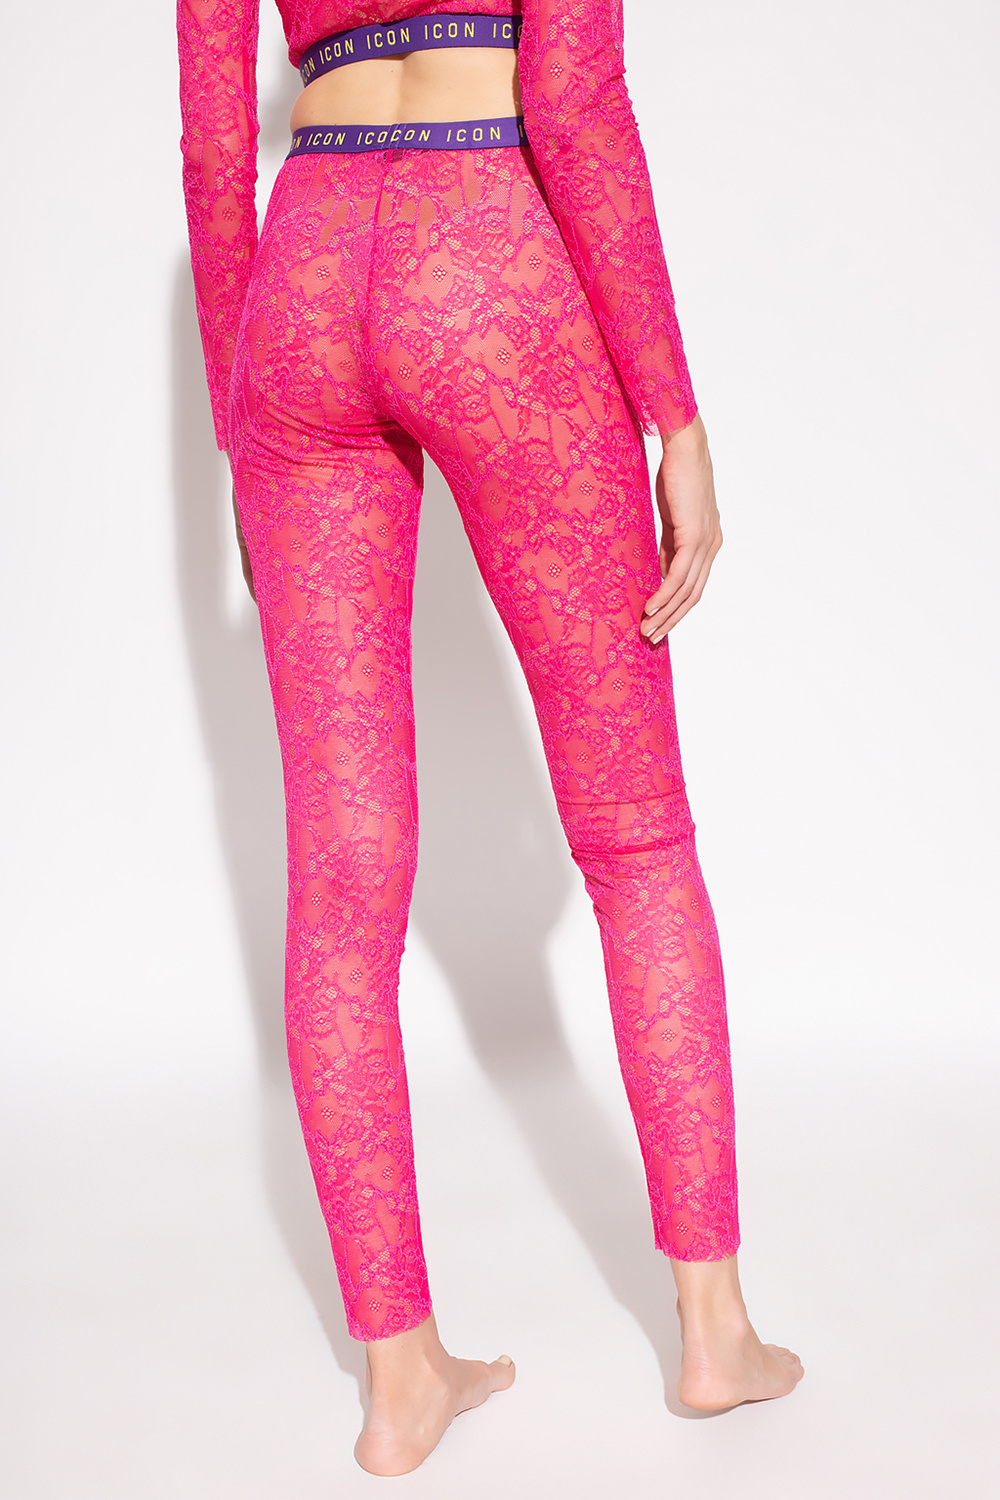 Gucci Pink Lace Tights